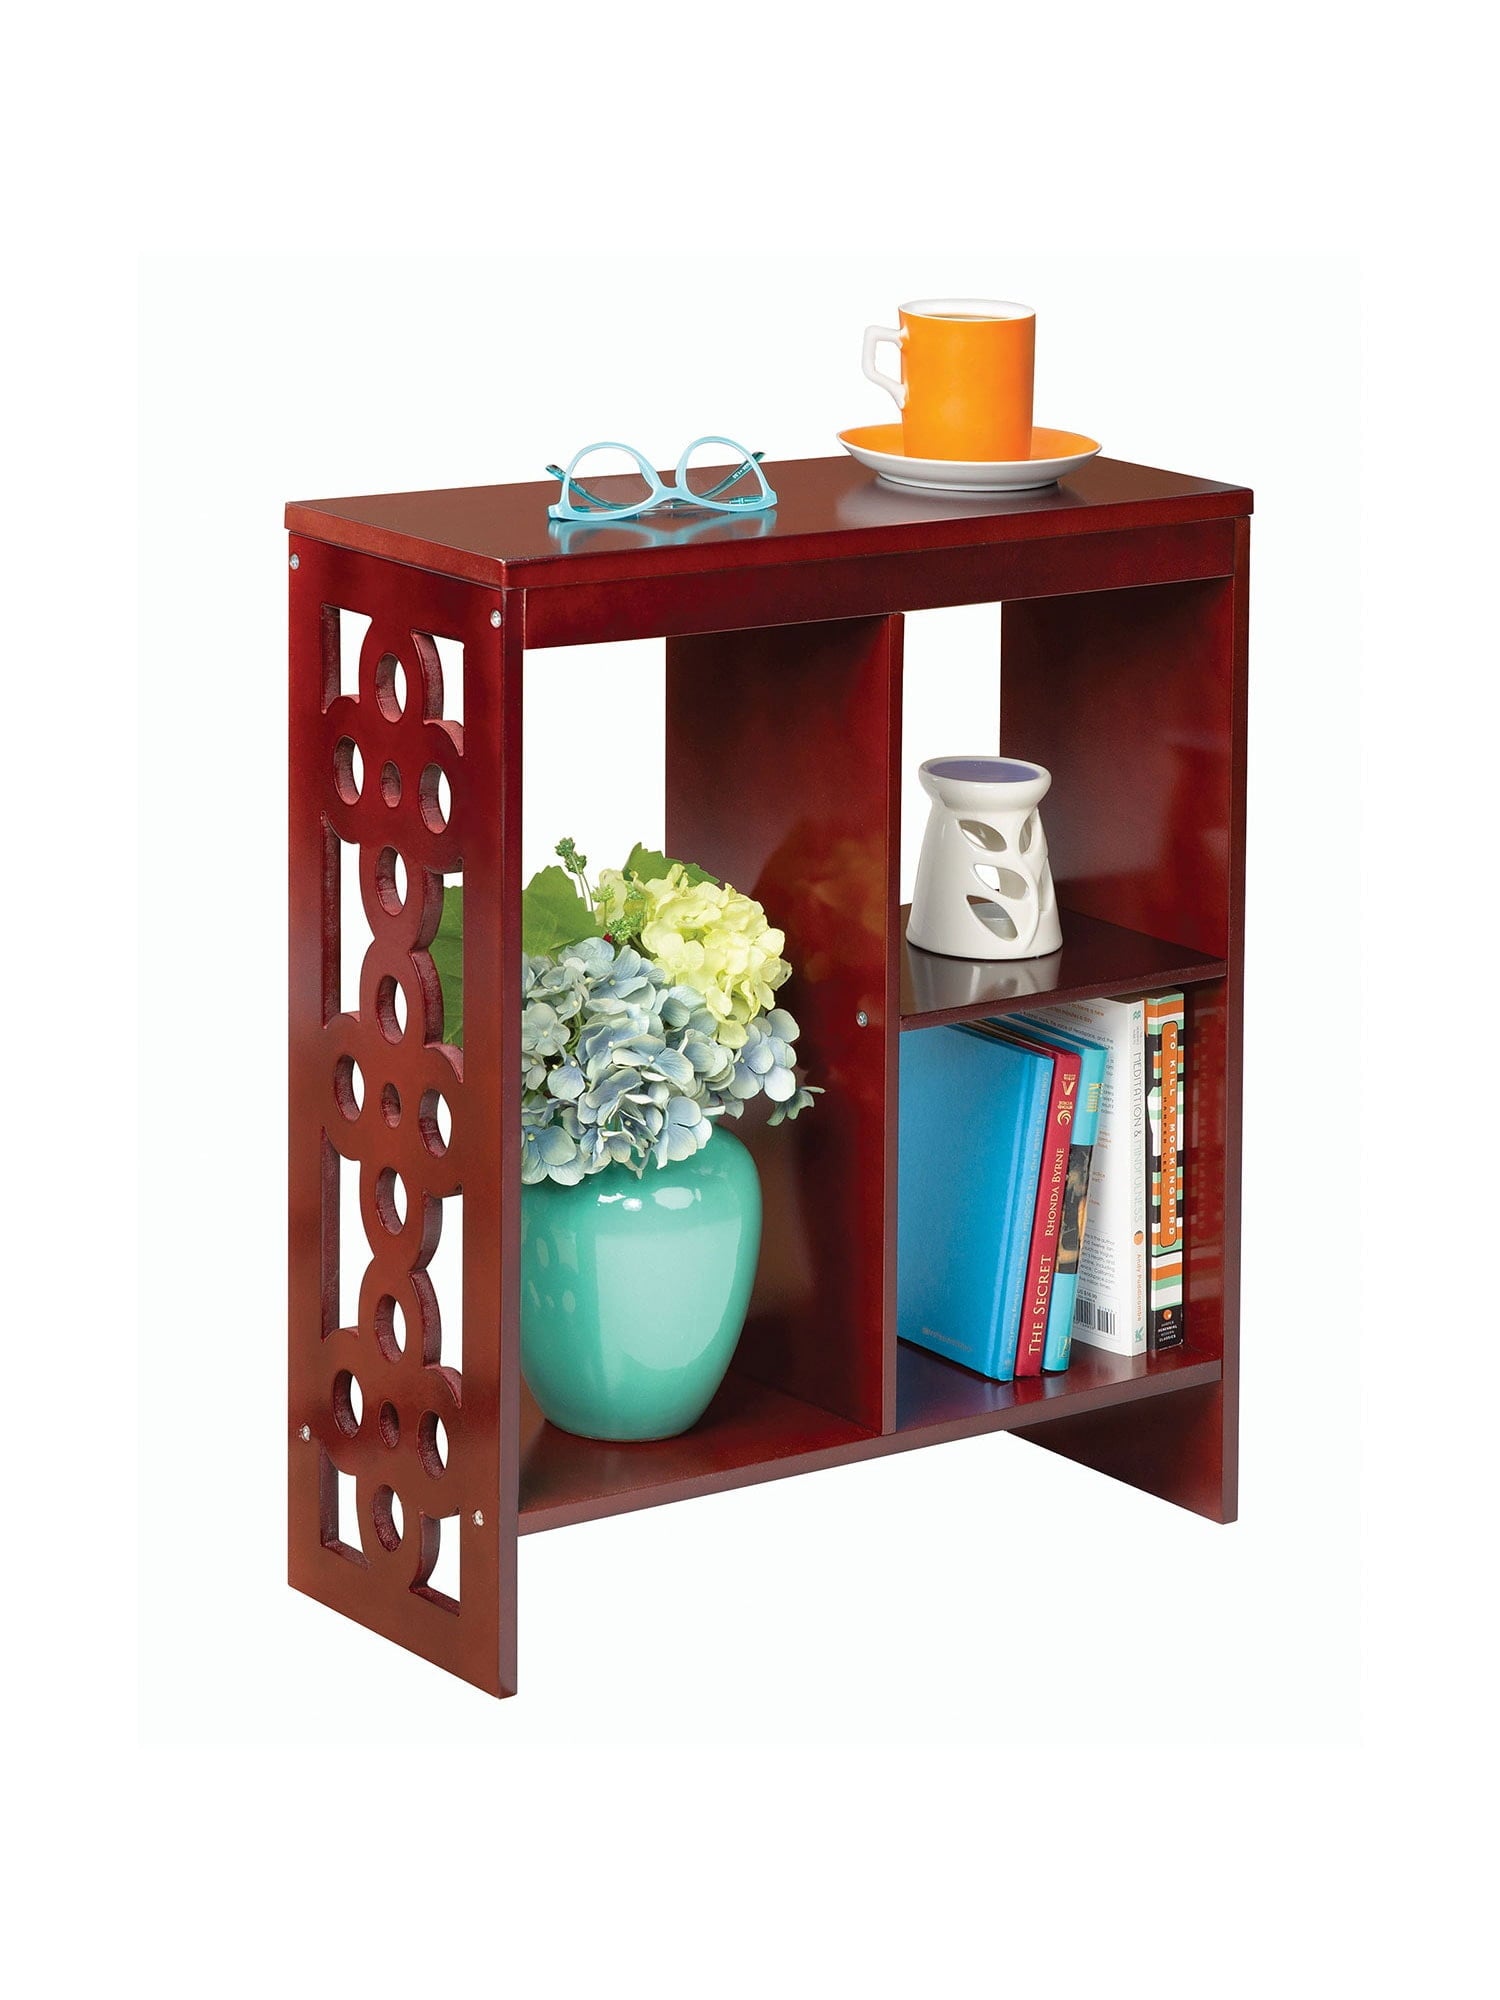 ETNA Products ETNA Slim End Table with Shelves, Narrow Side Table with Storage